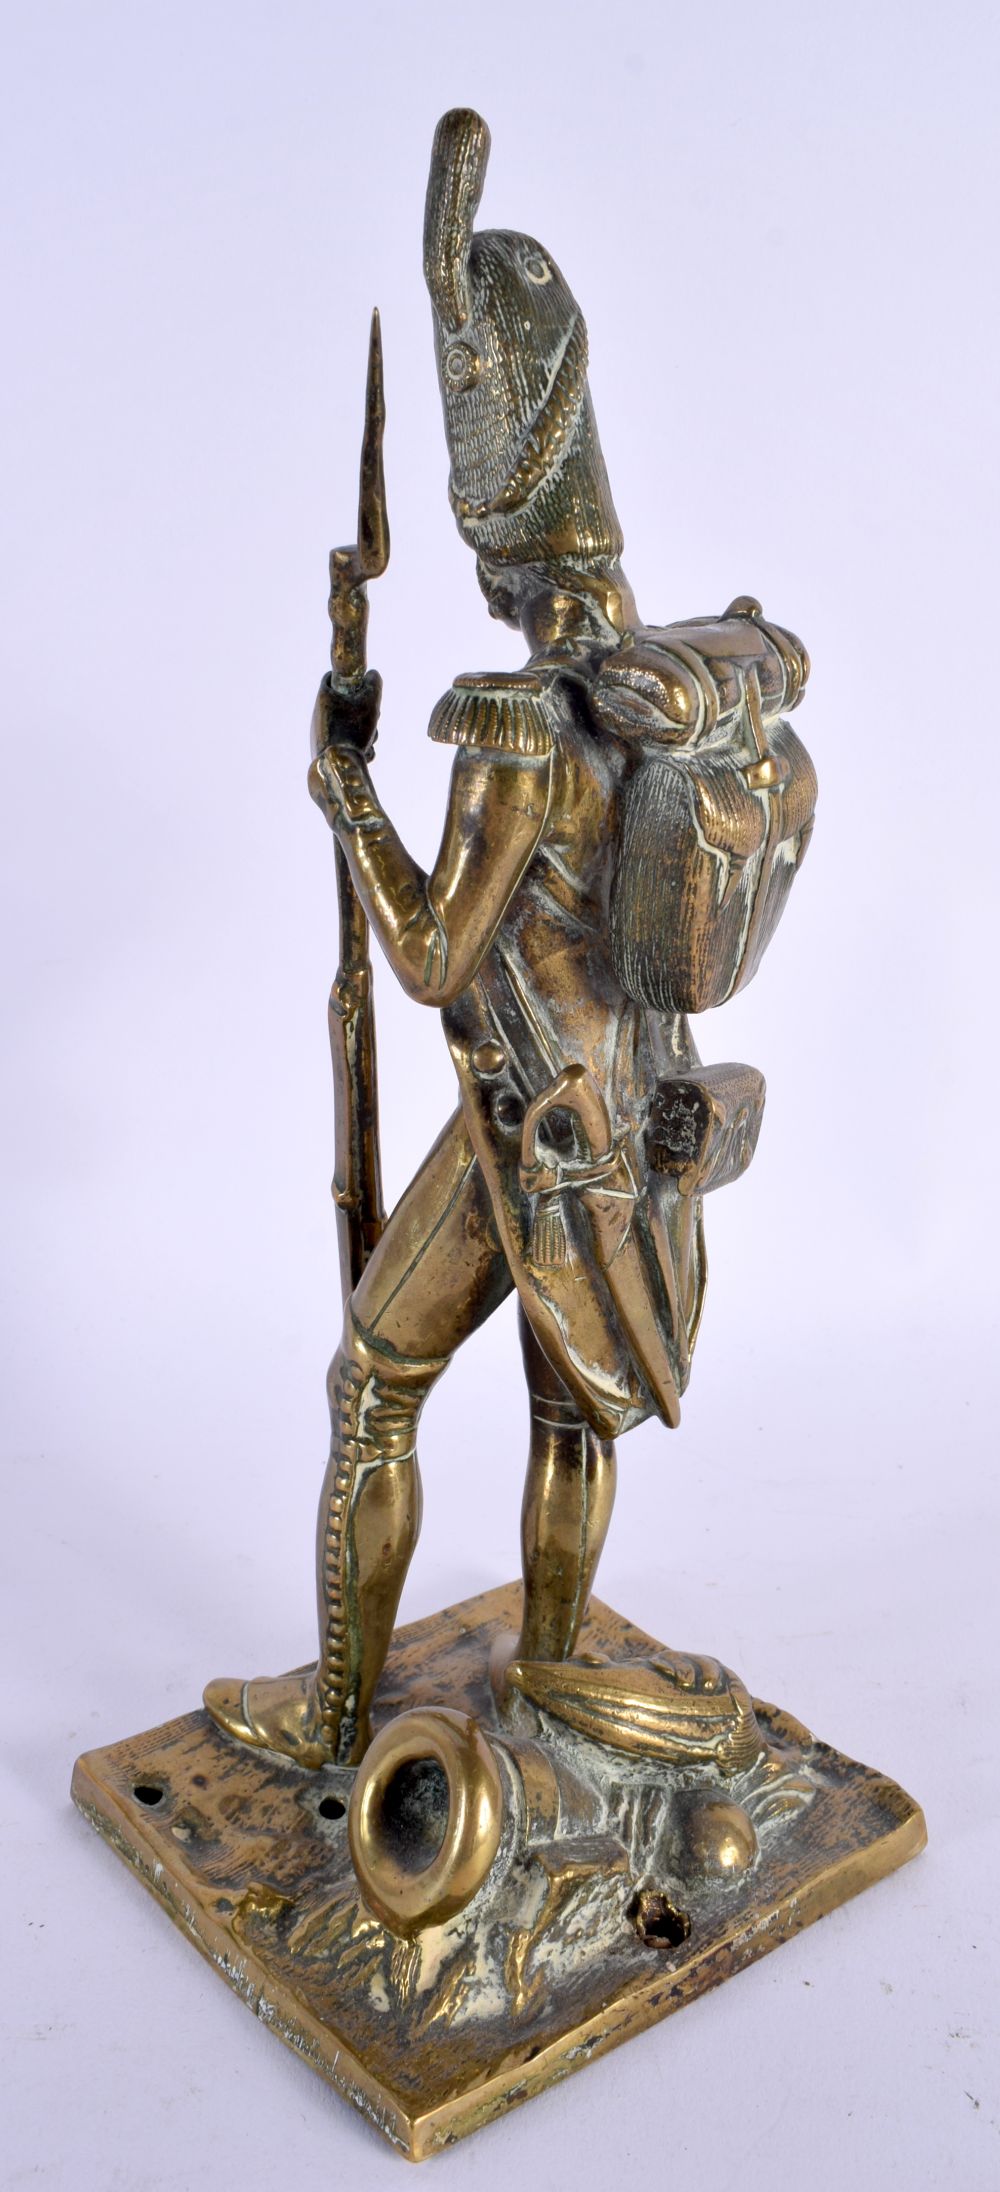 AN UNUSUAL ANTIQUE MILITARY BRONZE FIGURE. 24 cm high. - Image 2 of 4